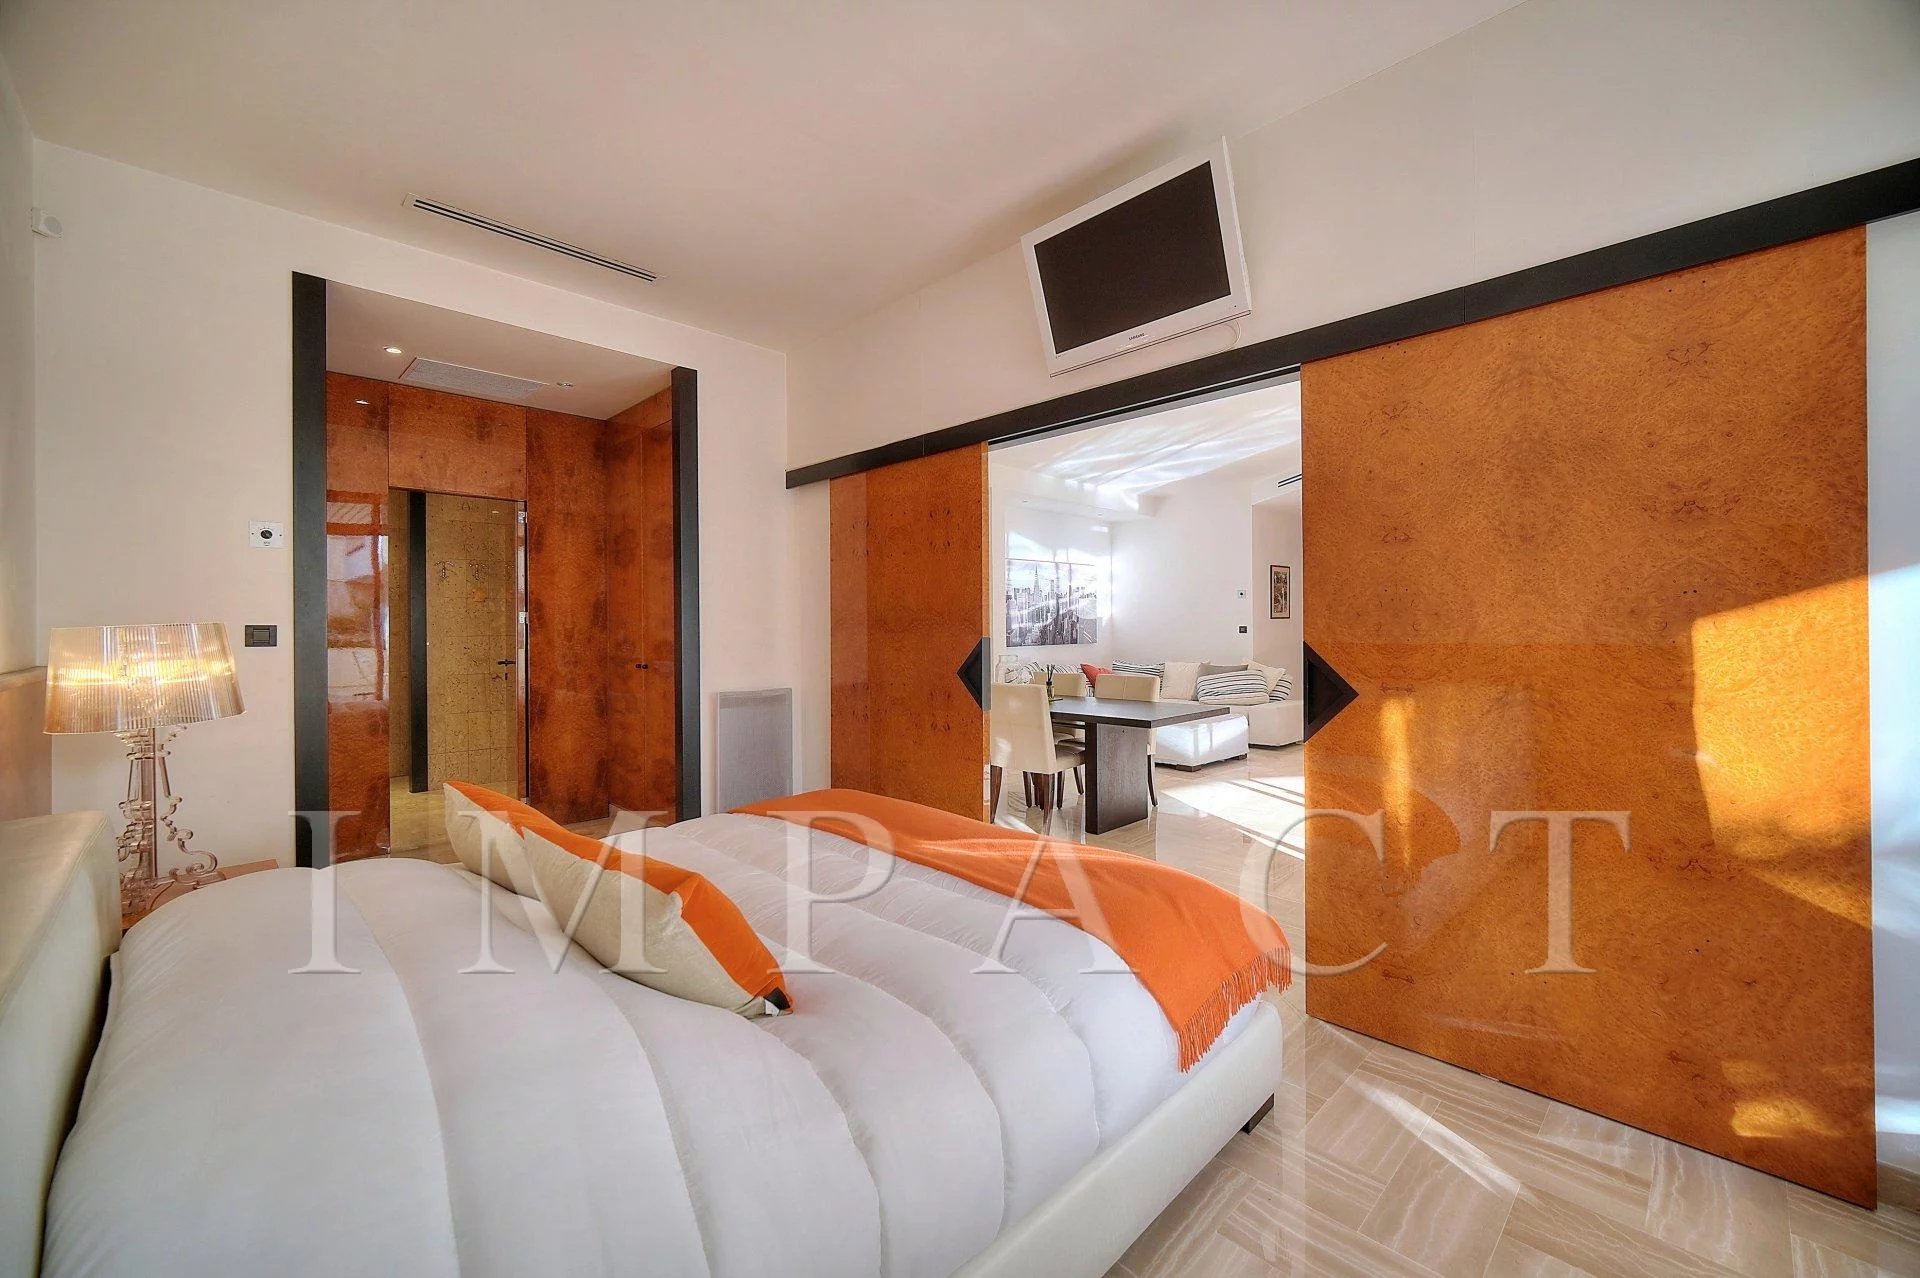 Superb 1 bedroom apartment to rent, Cannes center